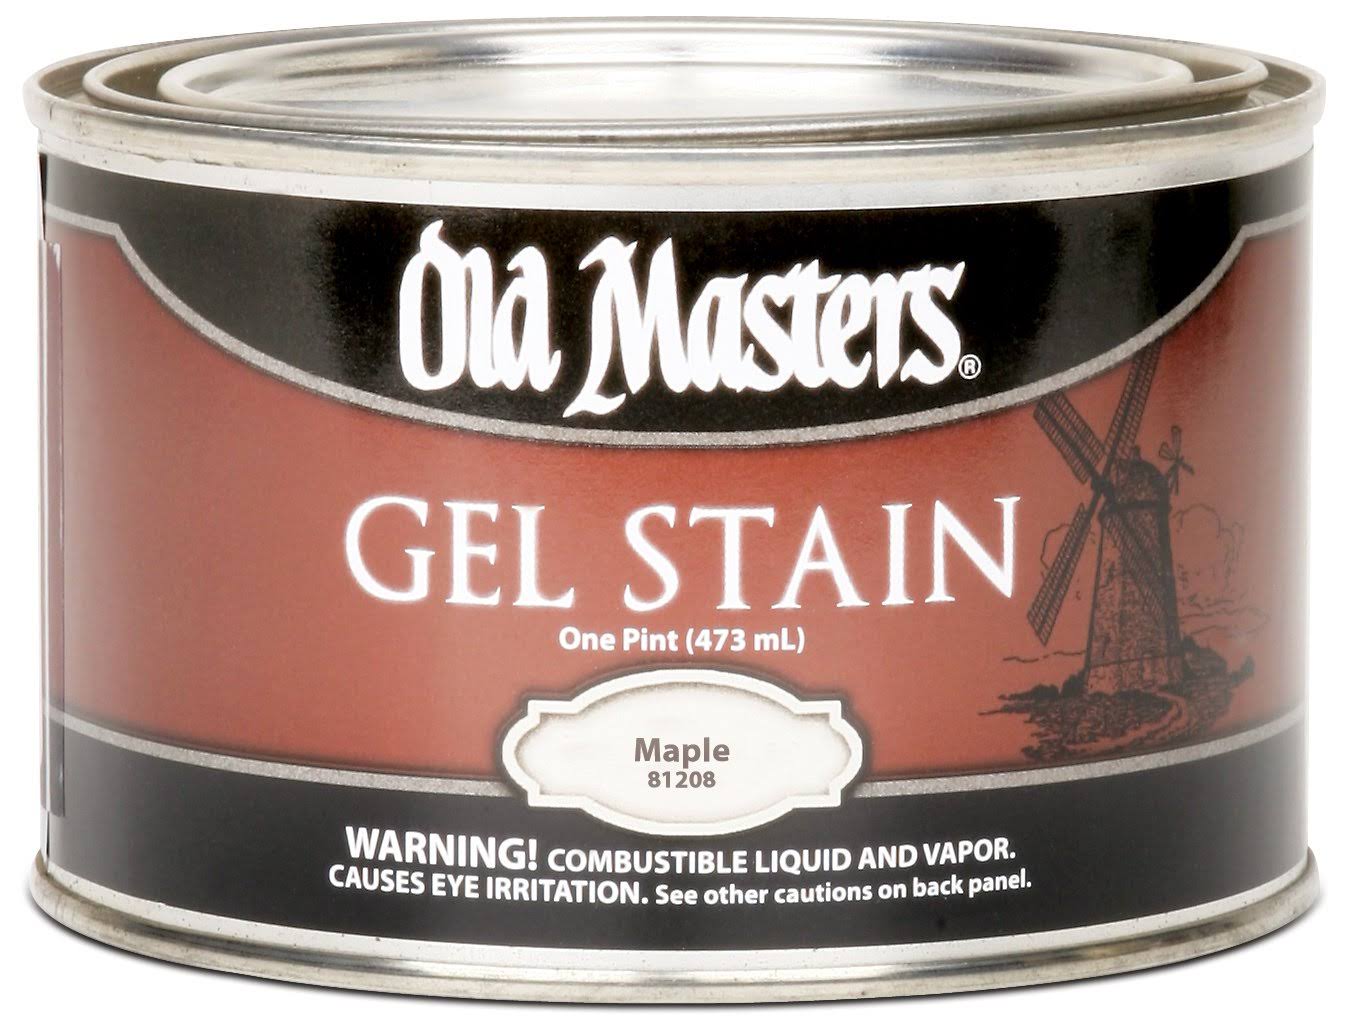 Old Masters Gel Stain - Maple, 1pt